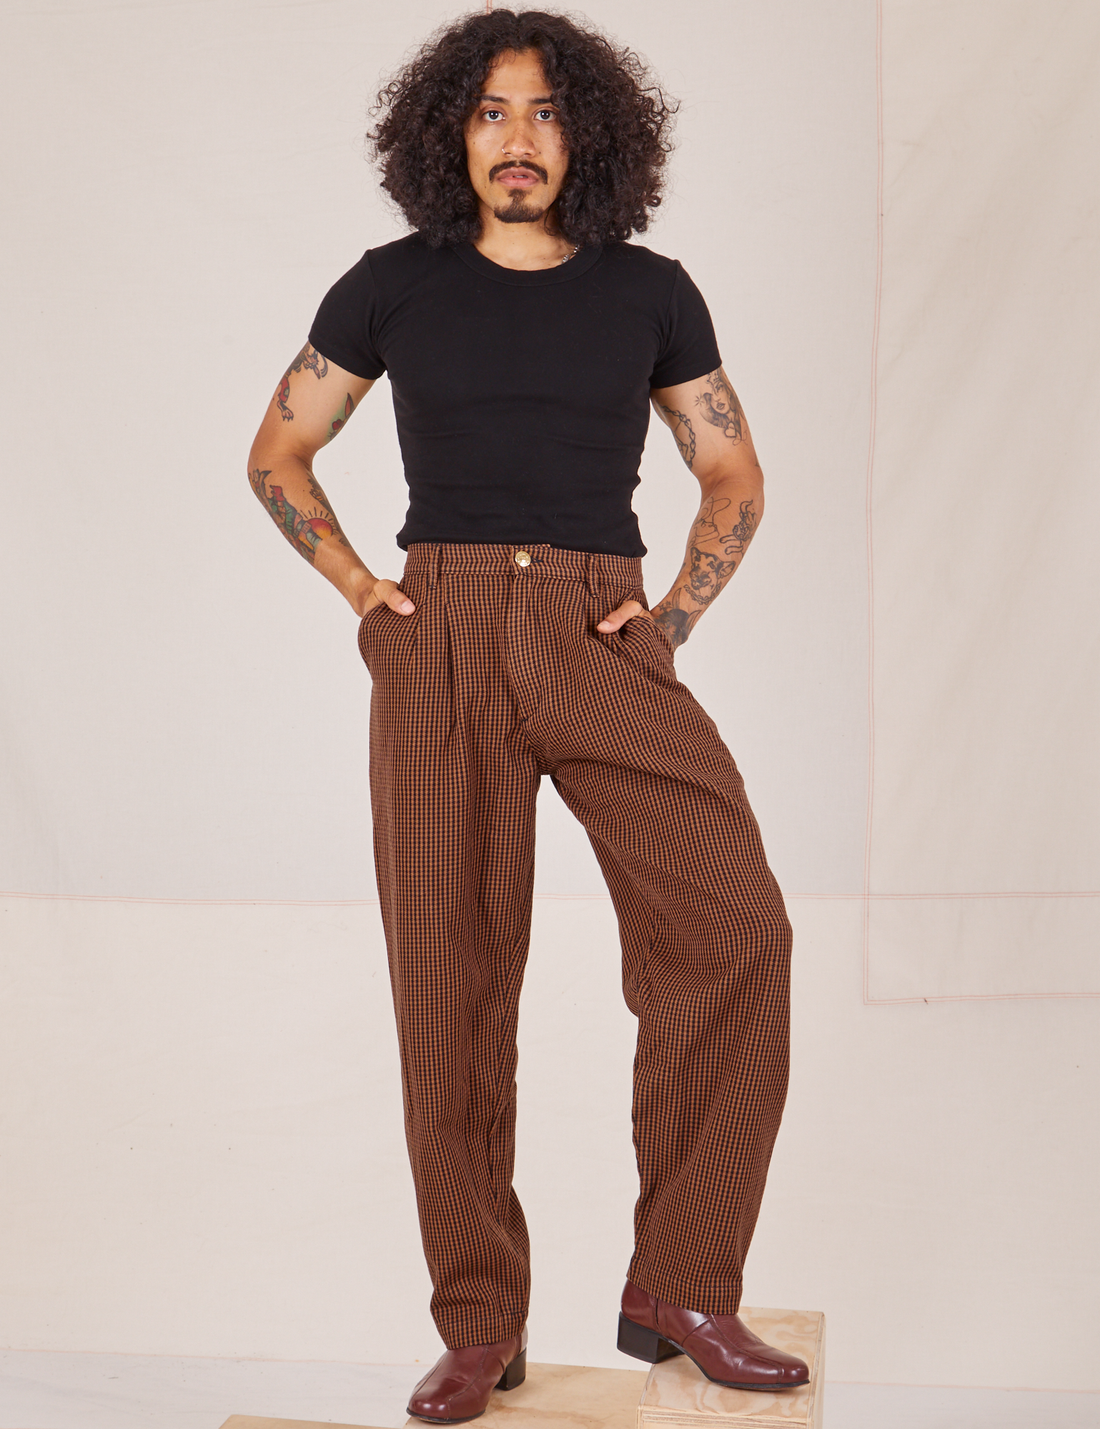 Jesse is 5'8" and wearing XS Checker Trousers in Brown paired with black Baby Tee